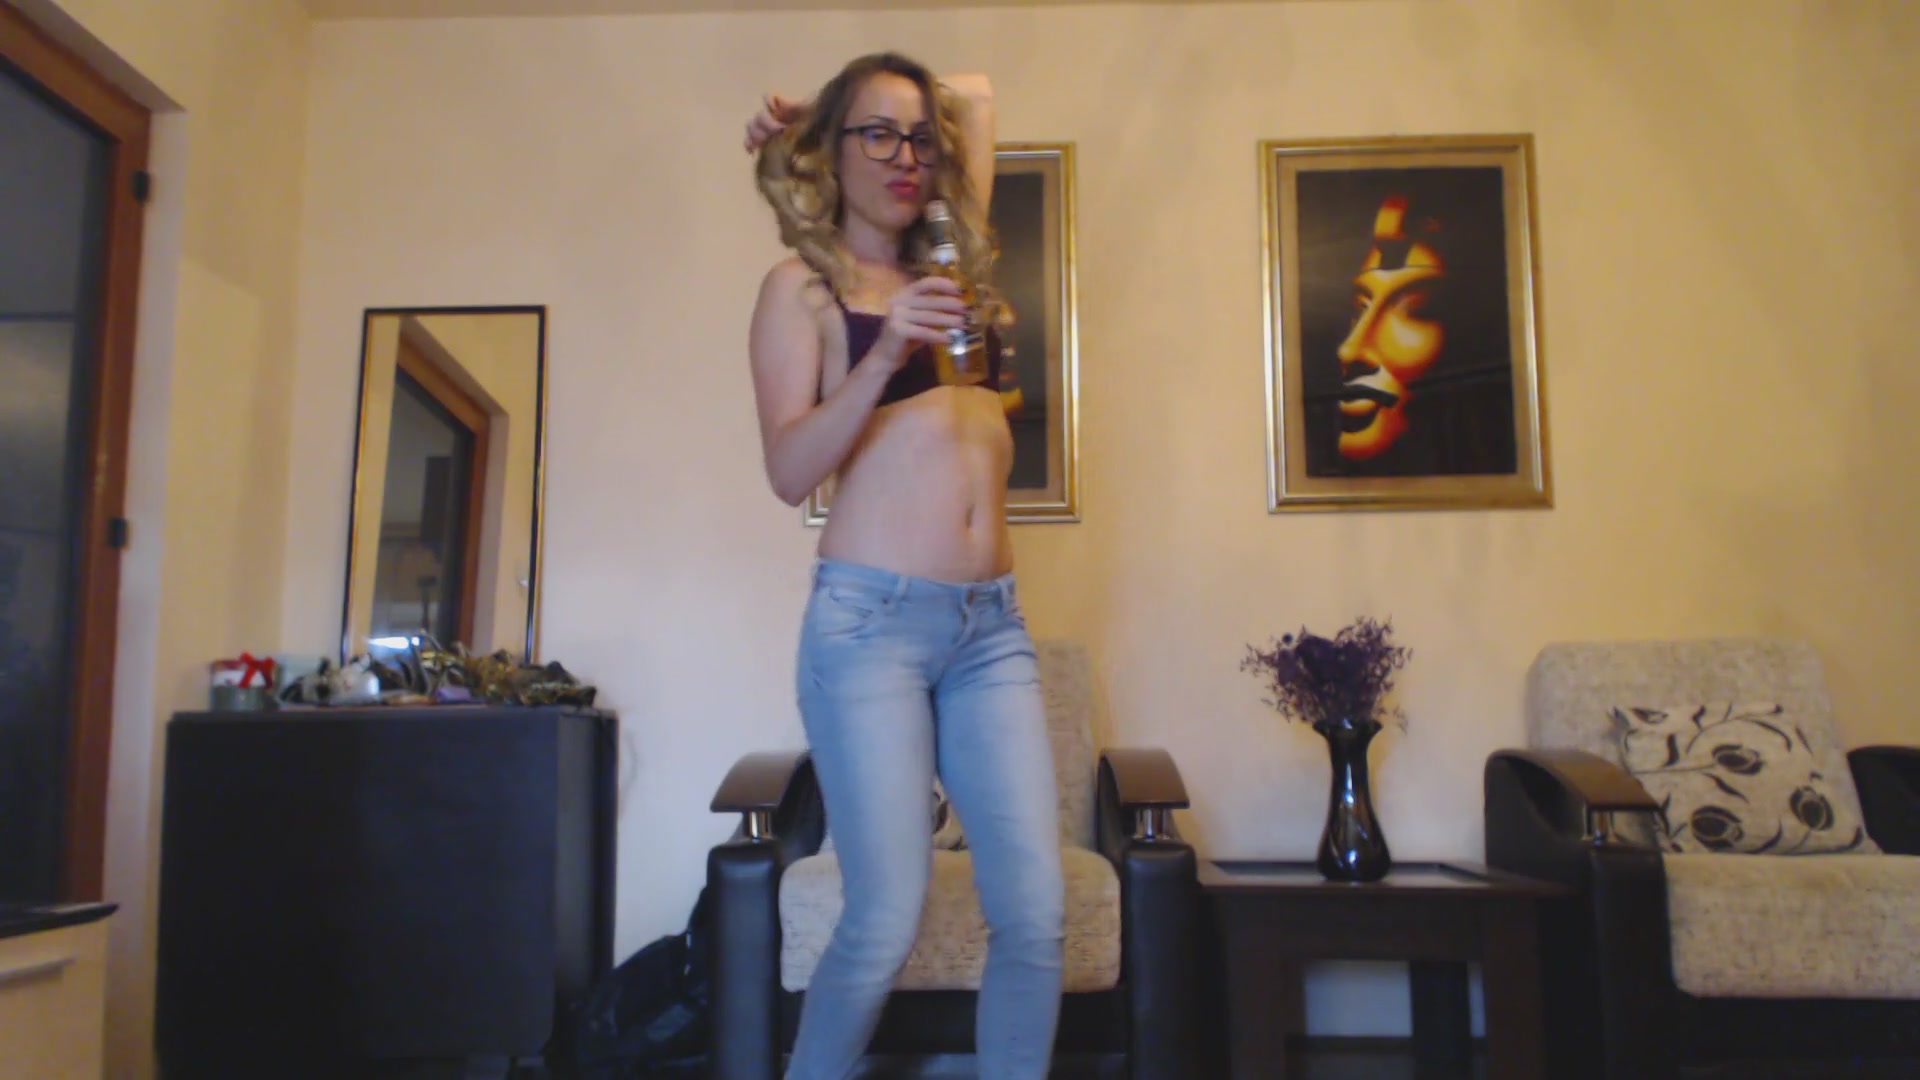 Cute girls with glasses pooping her jeans